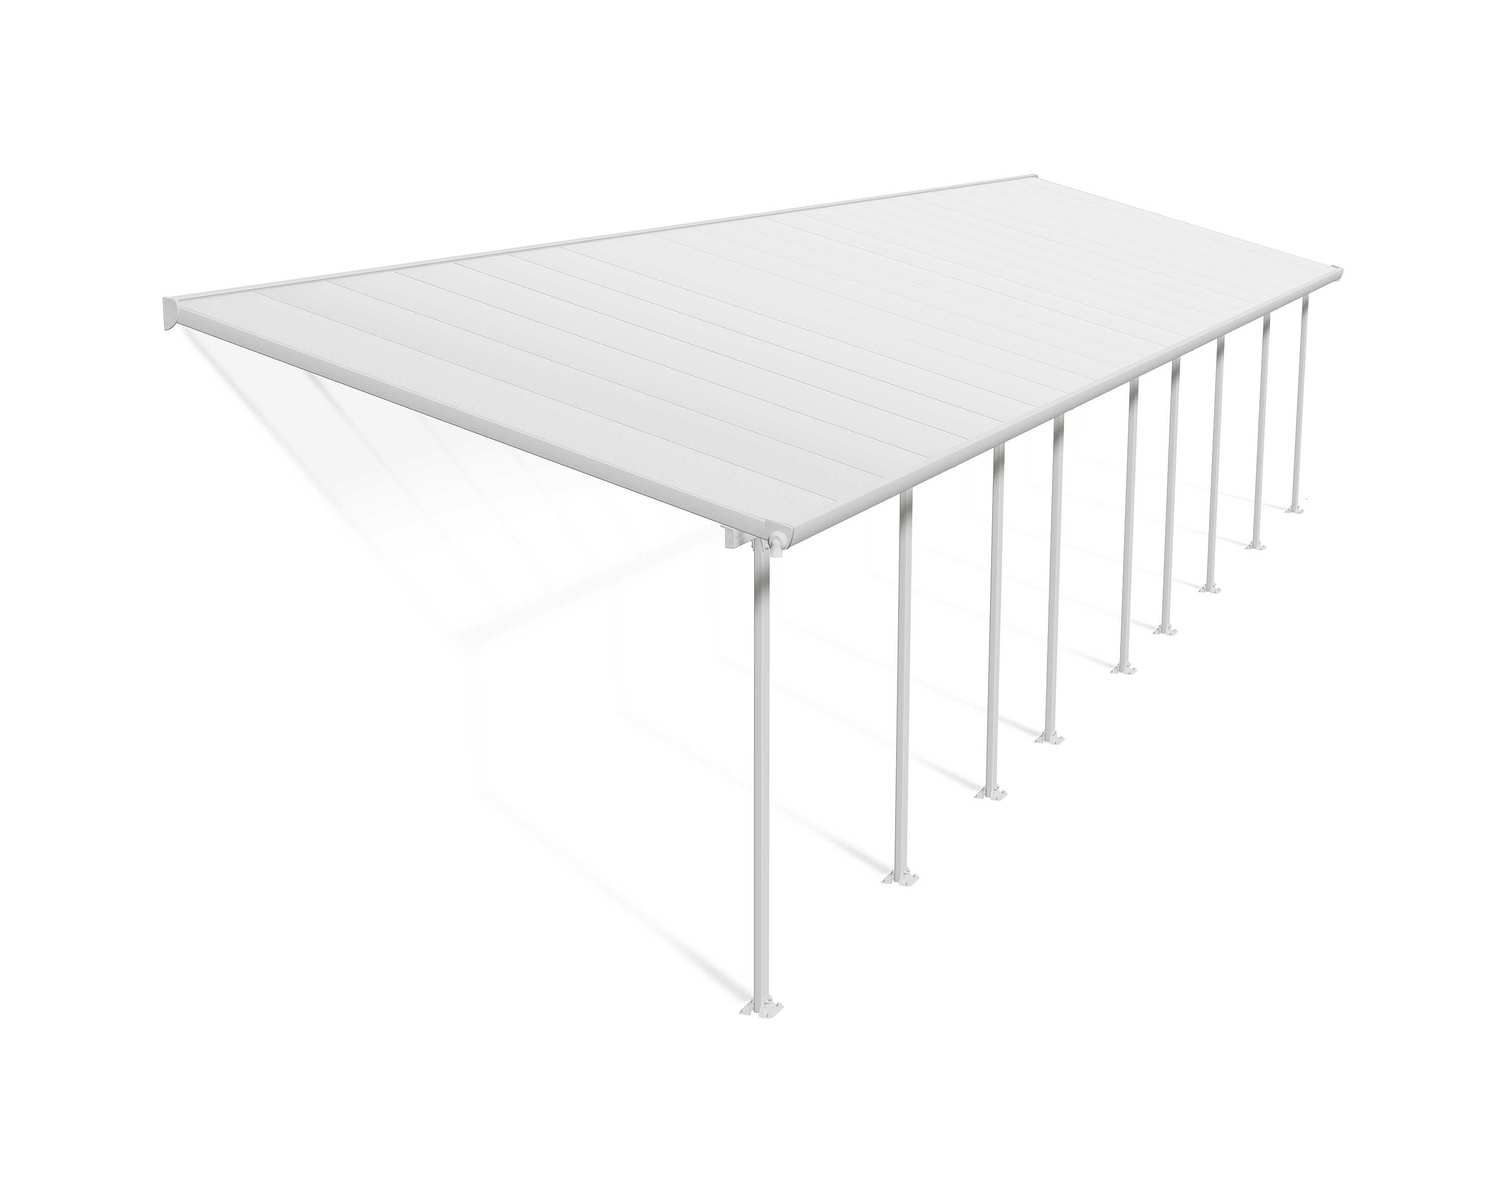 Feria 10 ft. x 44 ft. White Aluminium Patio Cover With 9 Posts, White Twin-Wall Polycarbonate Roof Panels.